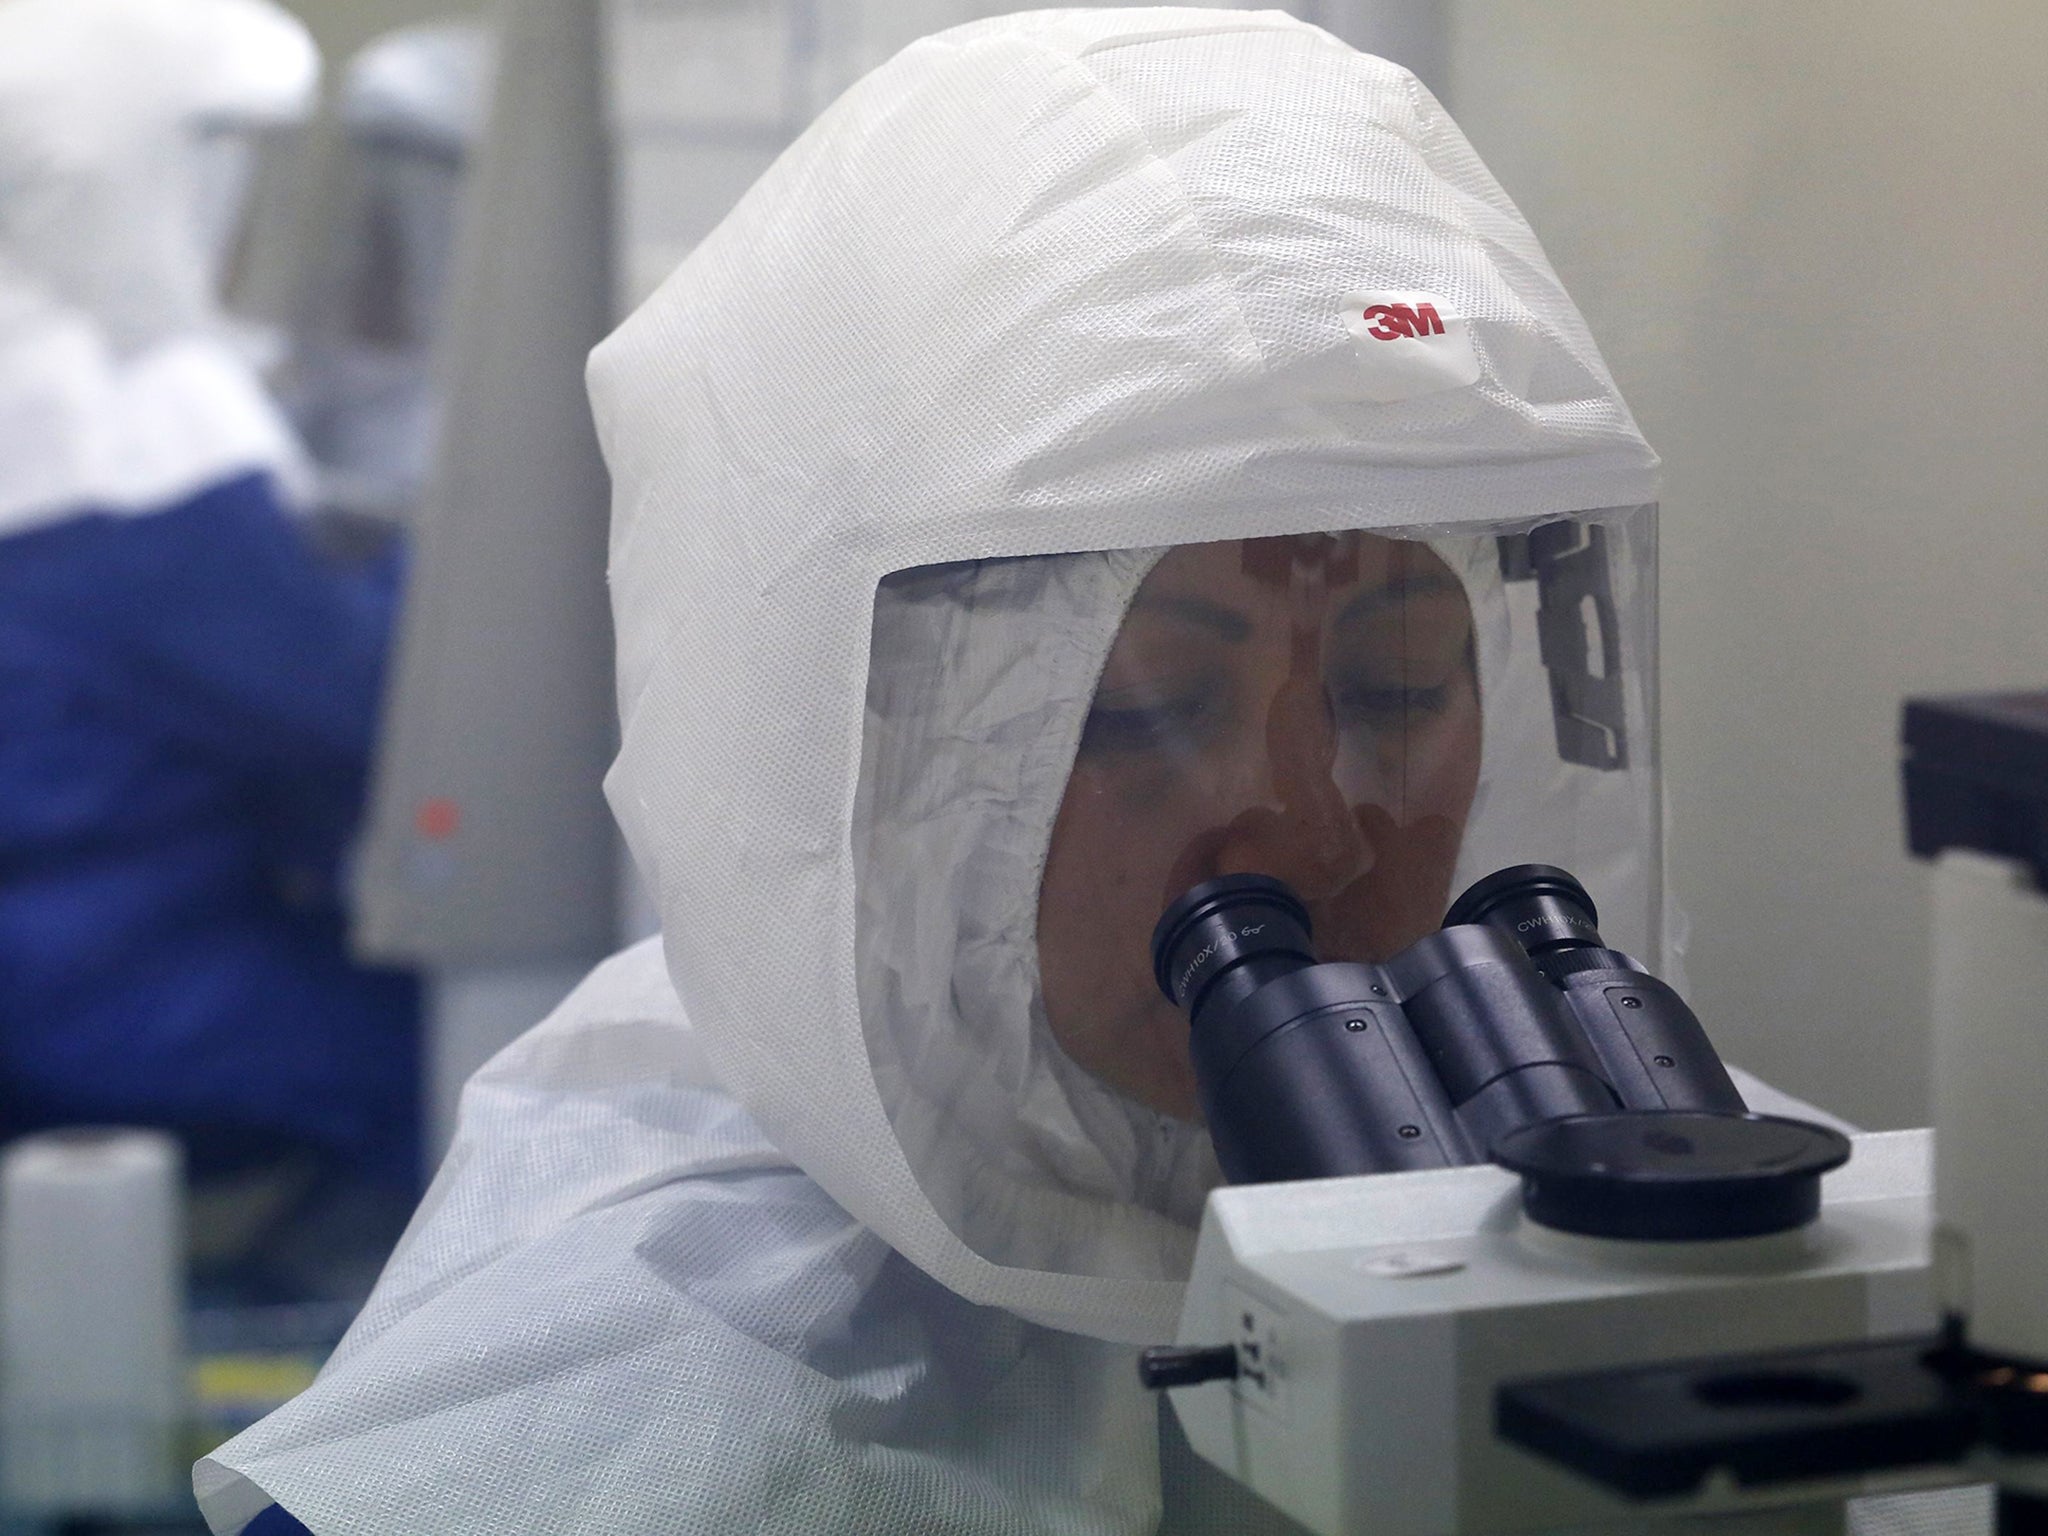 A woman in Australia is being tested for the deadly Ebola virus